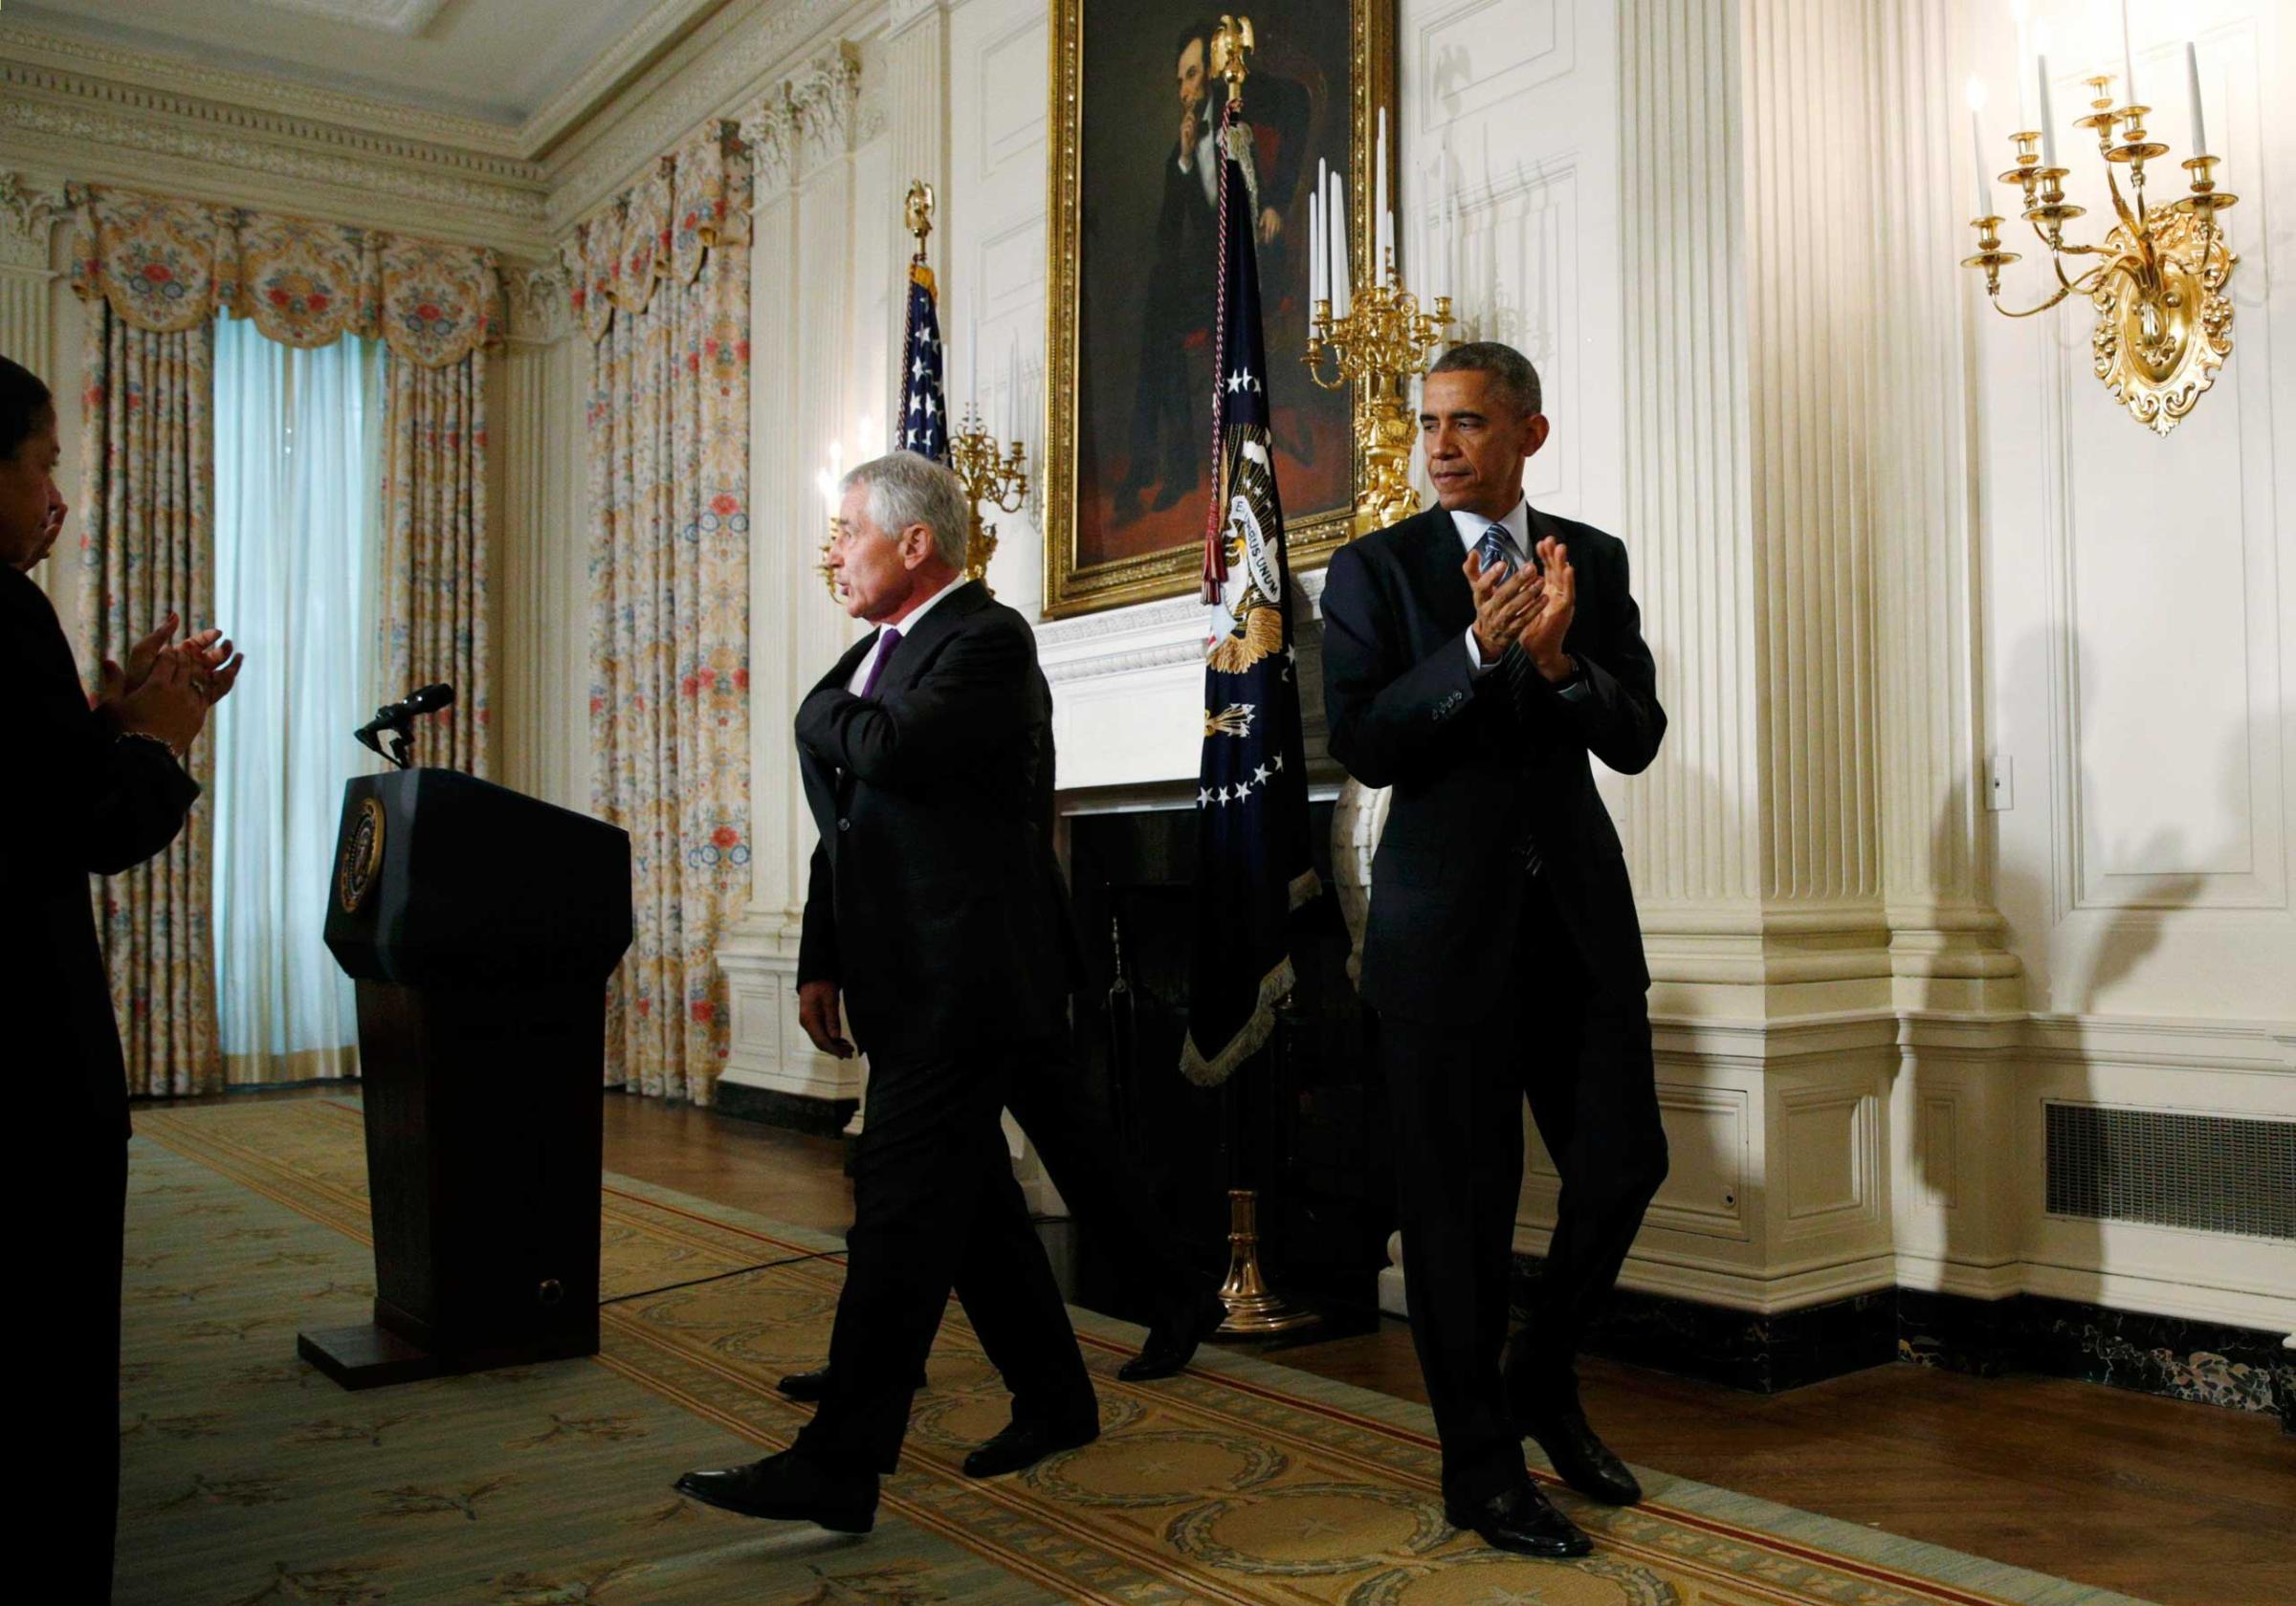 U.S. President Obama escorts Secretary of Defense Hagel out of the State Dining Room after they announced Hagel's resignation at the White House in Washington